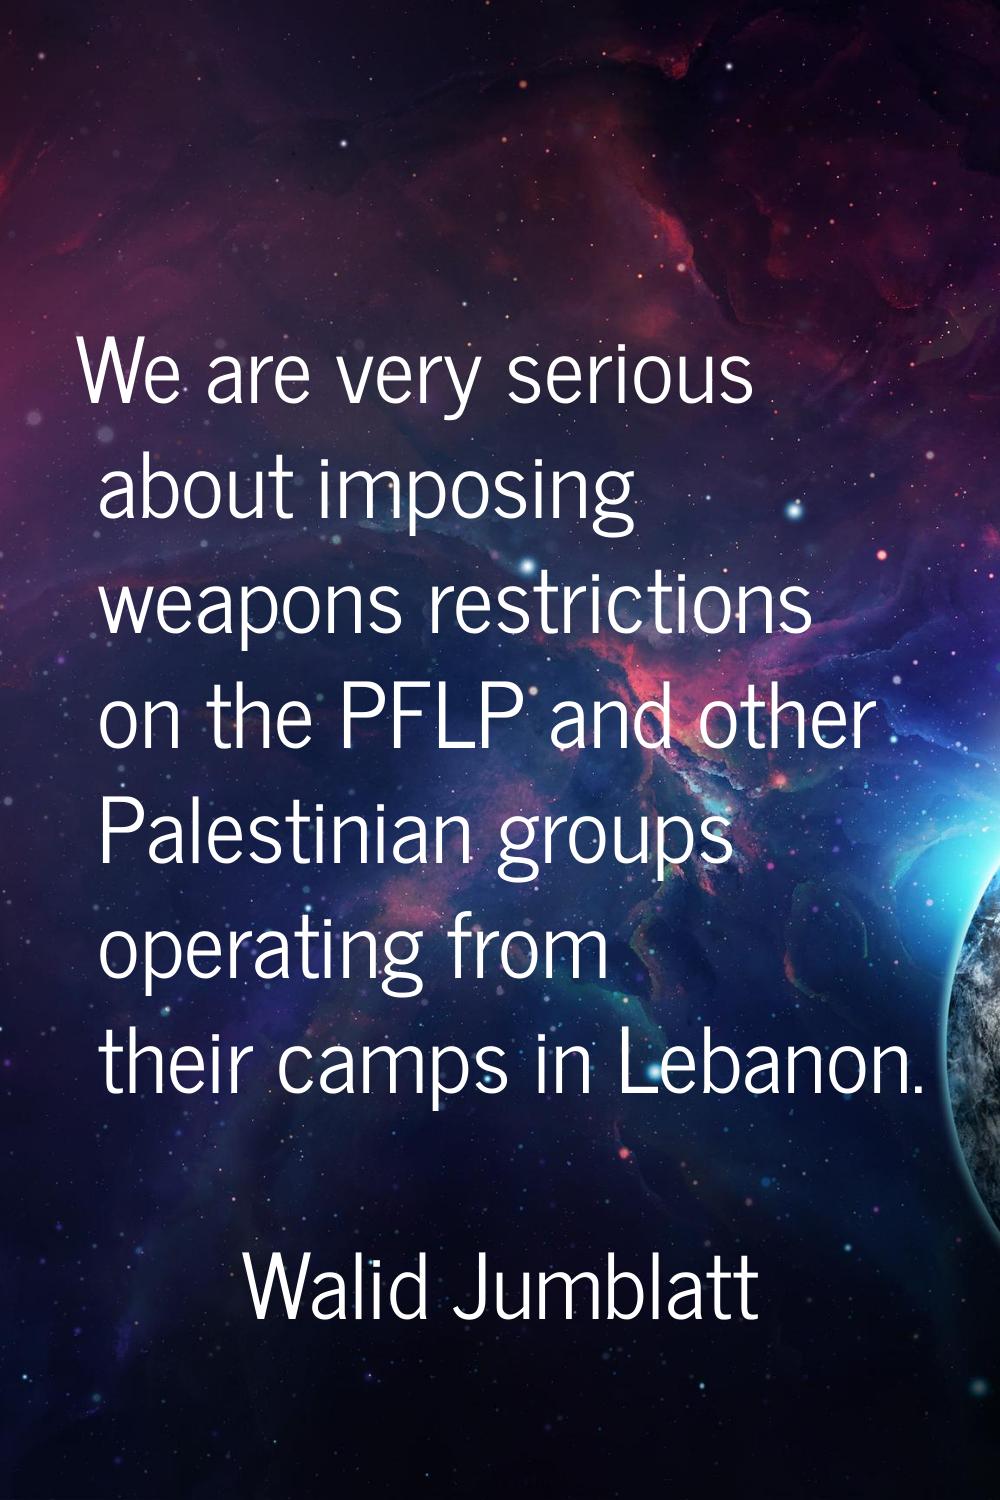 We are very serious about imposing weapons restrictions on the PFLP and other Palestinian groups op